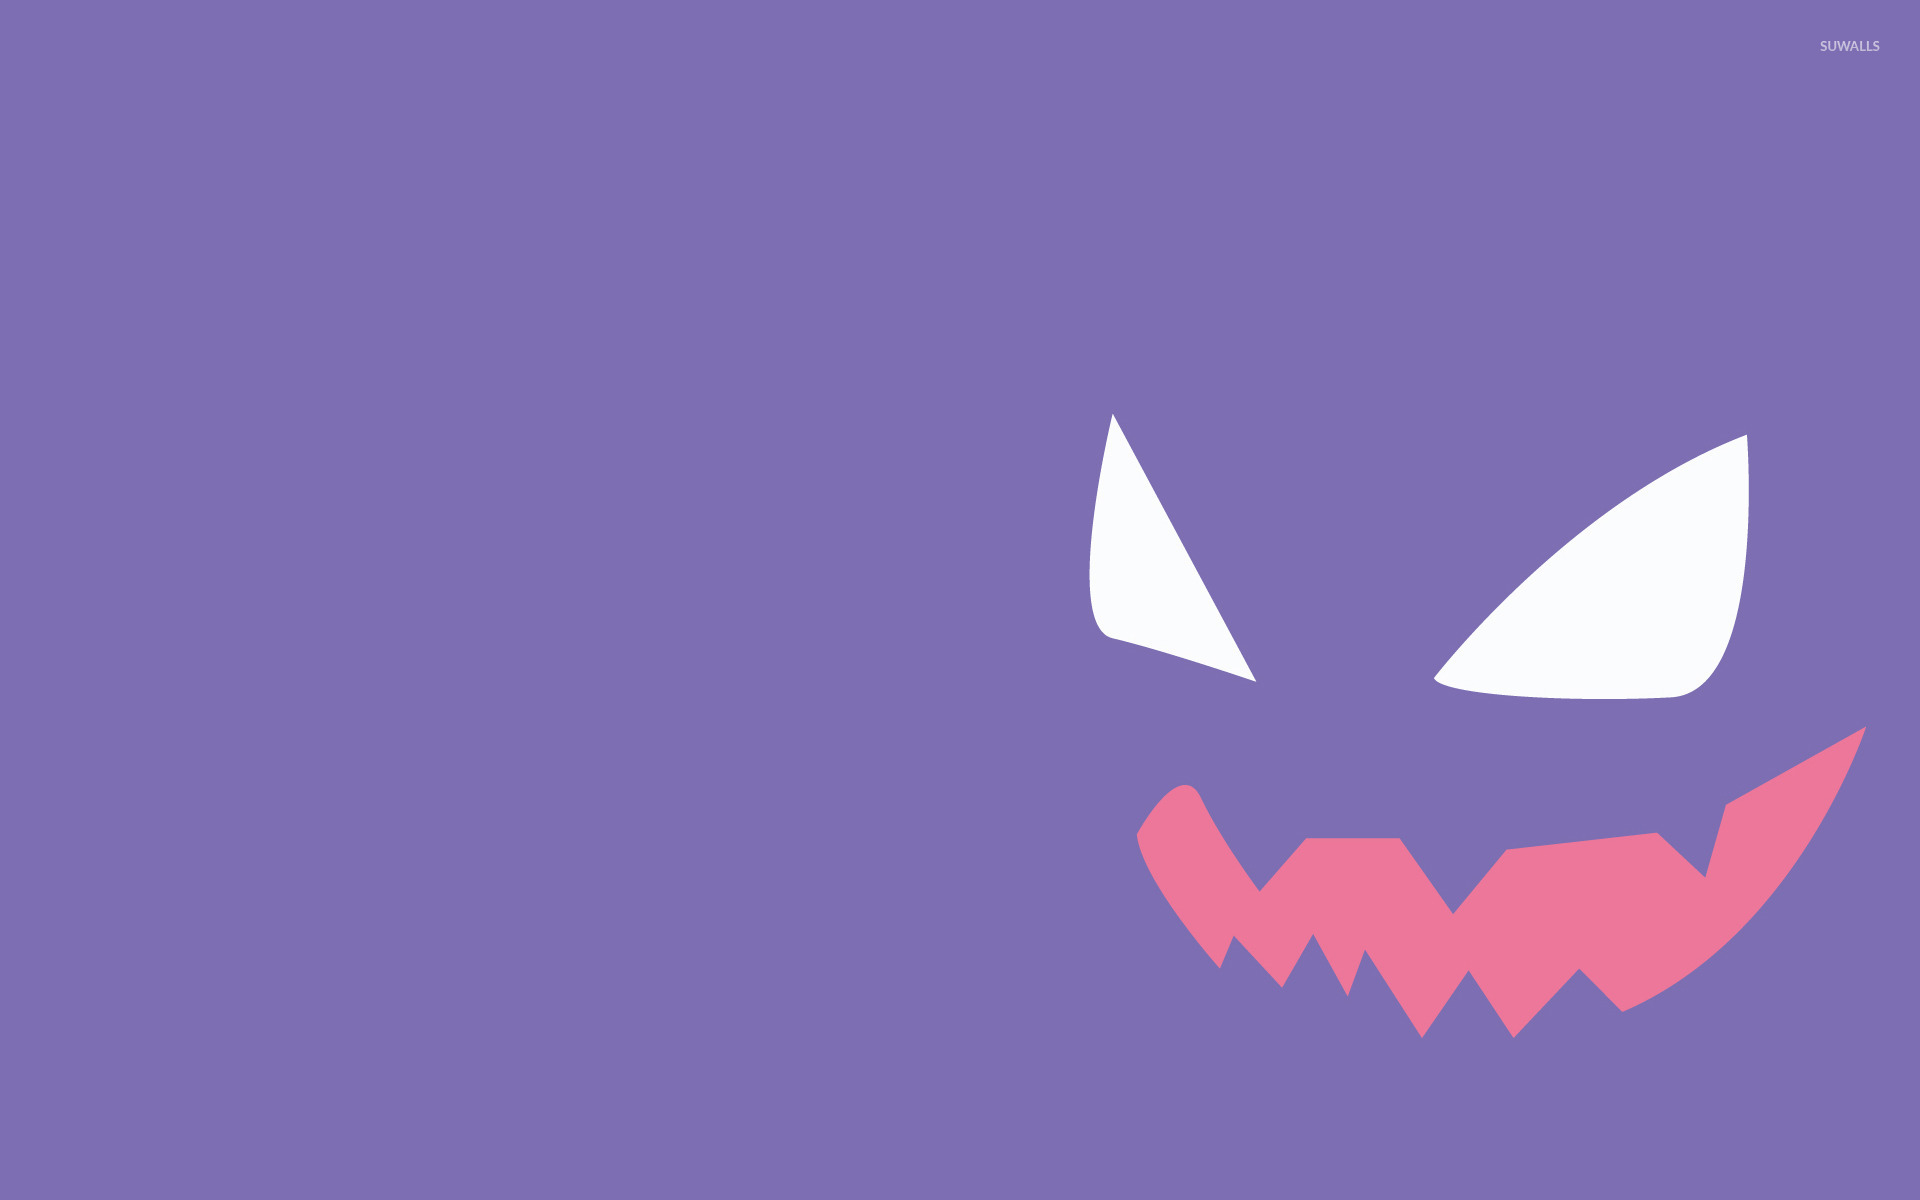 30 Haunter Pokémon HD Wallpapers and Backgrounds